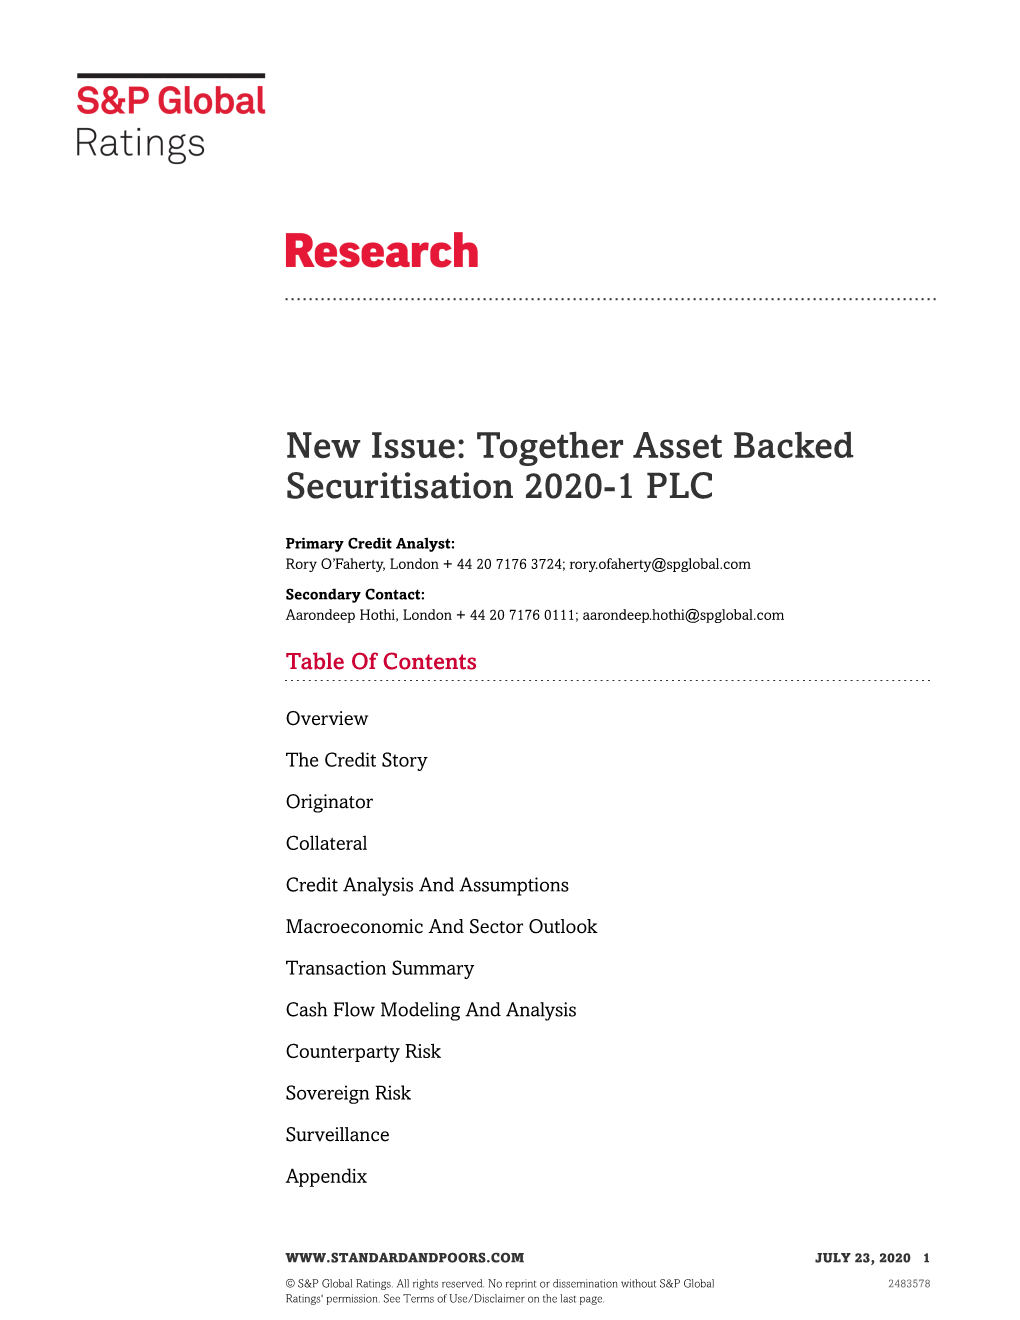 New Issue: Together Asset Backed Securitisation 2020-1 PLC